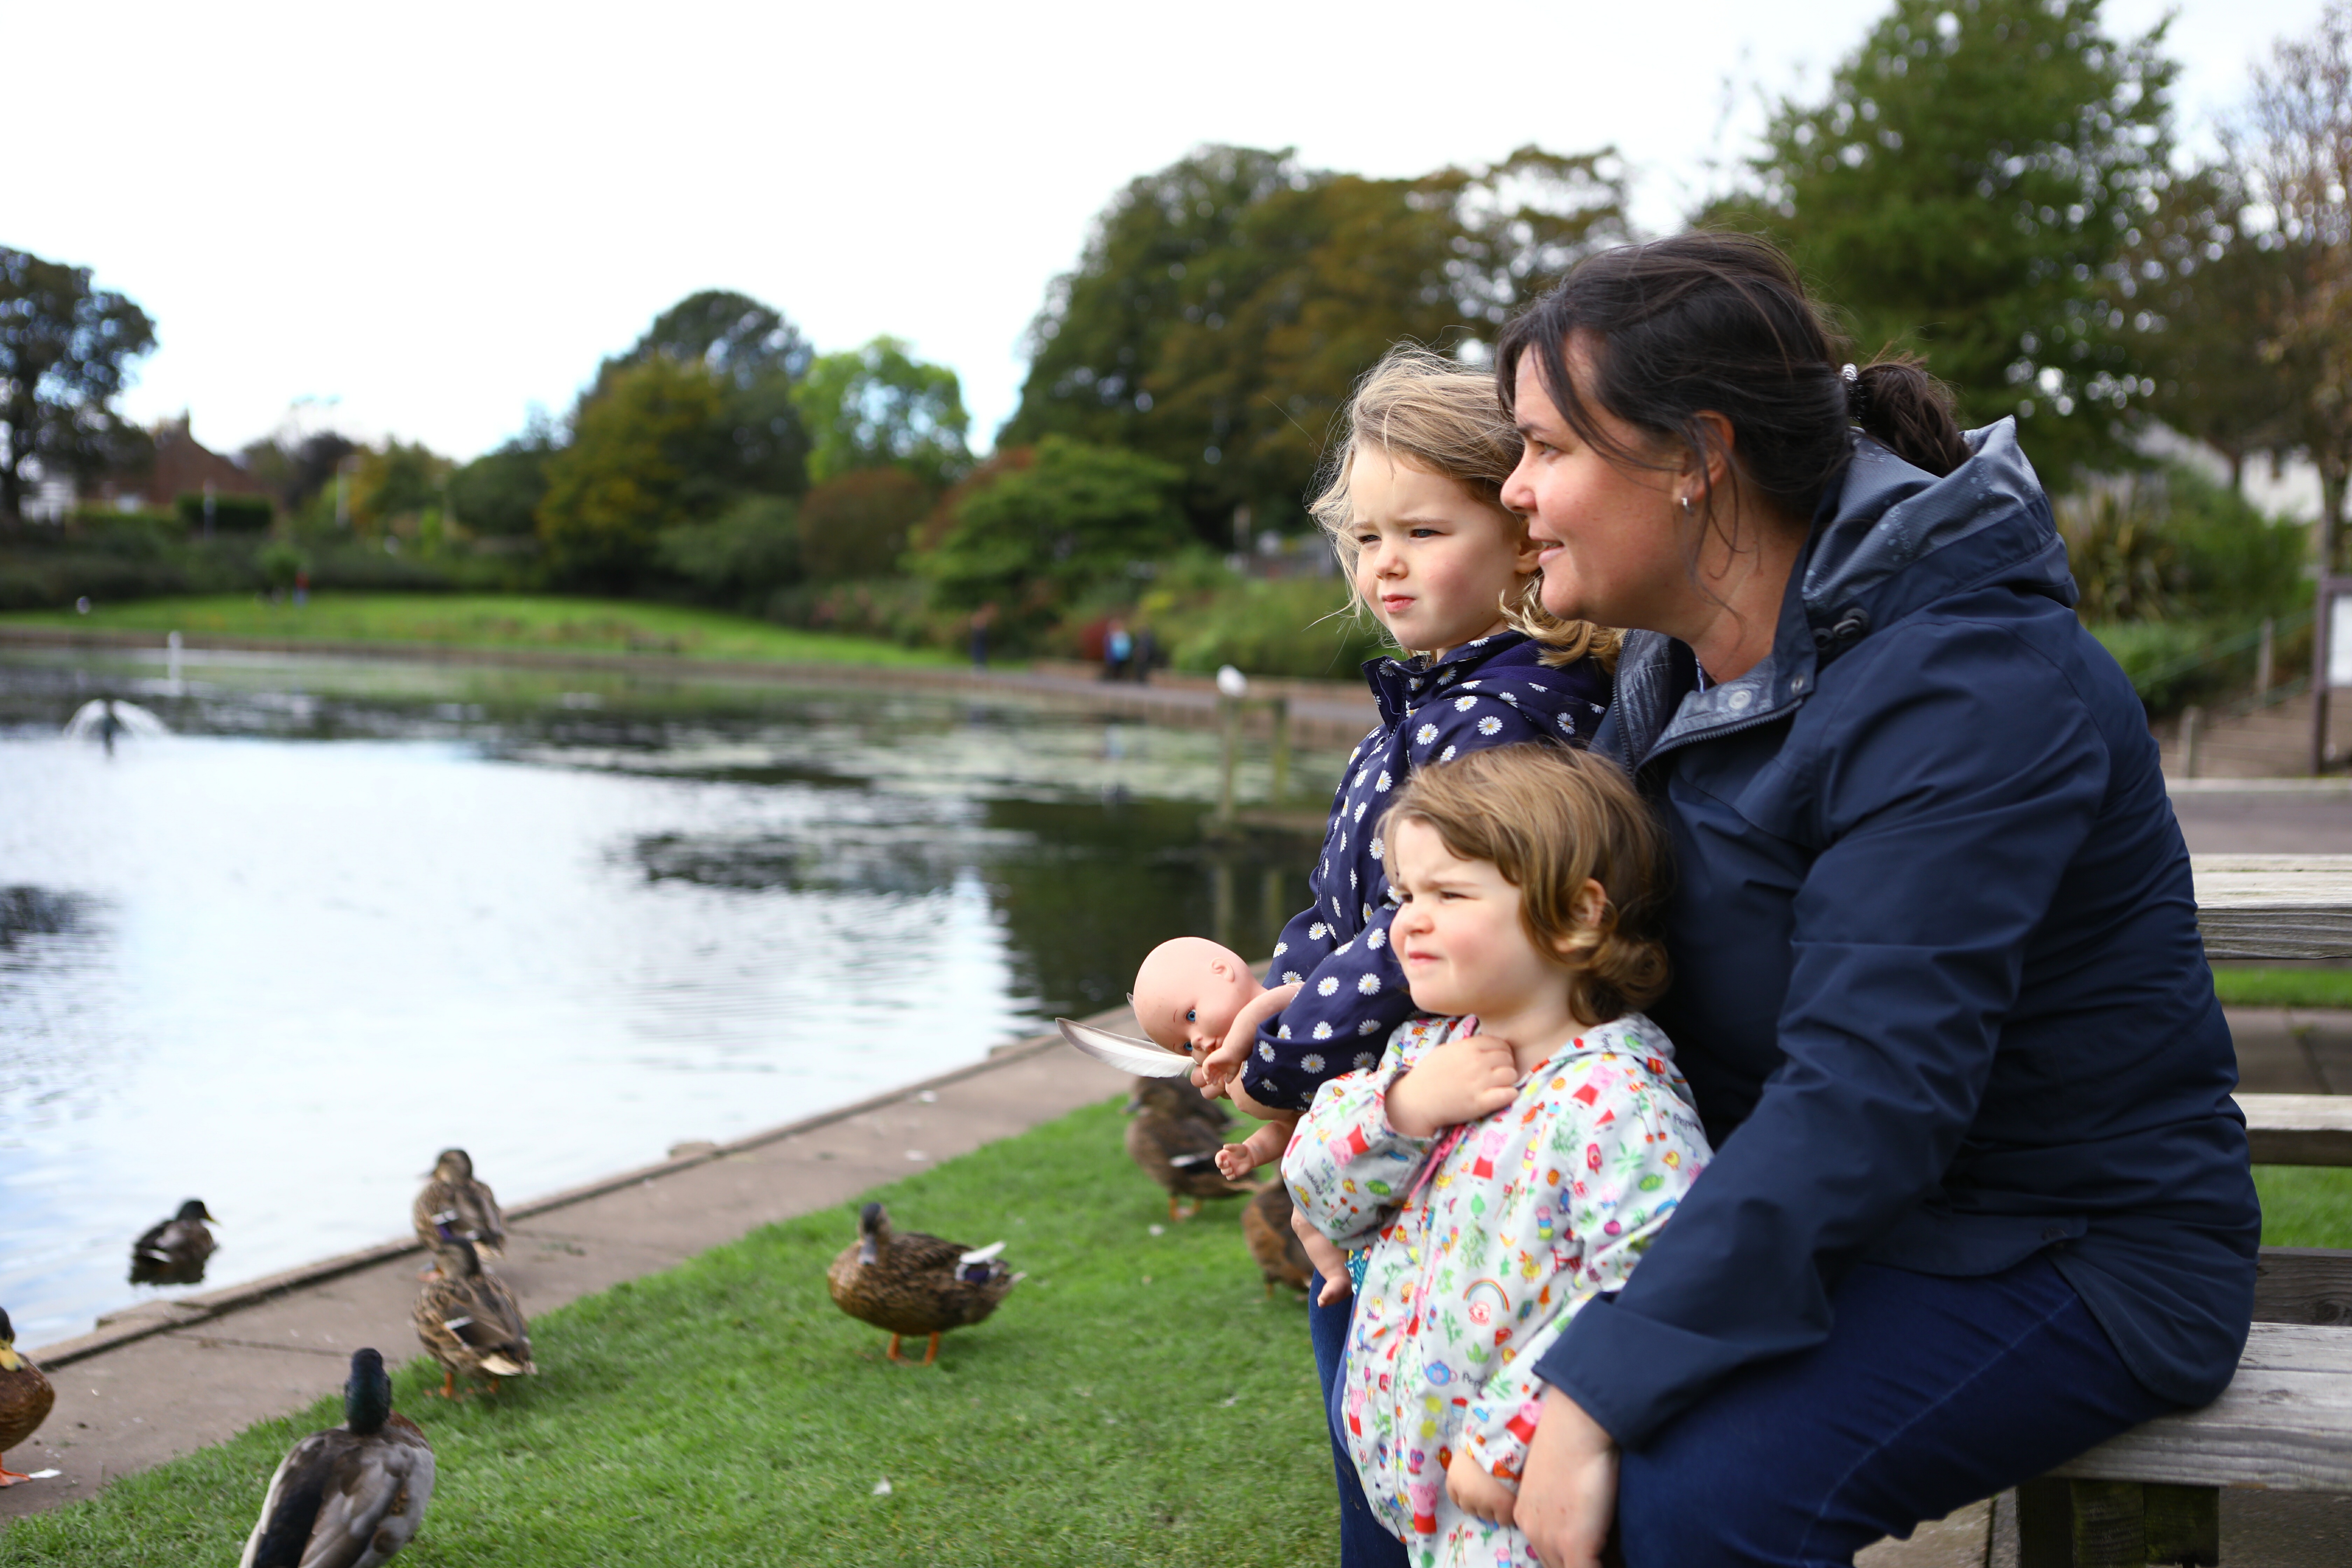 Kirsty Napier with her daughters Esther, age 4 and Brooke, age 3, looking out for the elusive 'Keptie Hand' at Keptie Ponds in Arbroath.